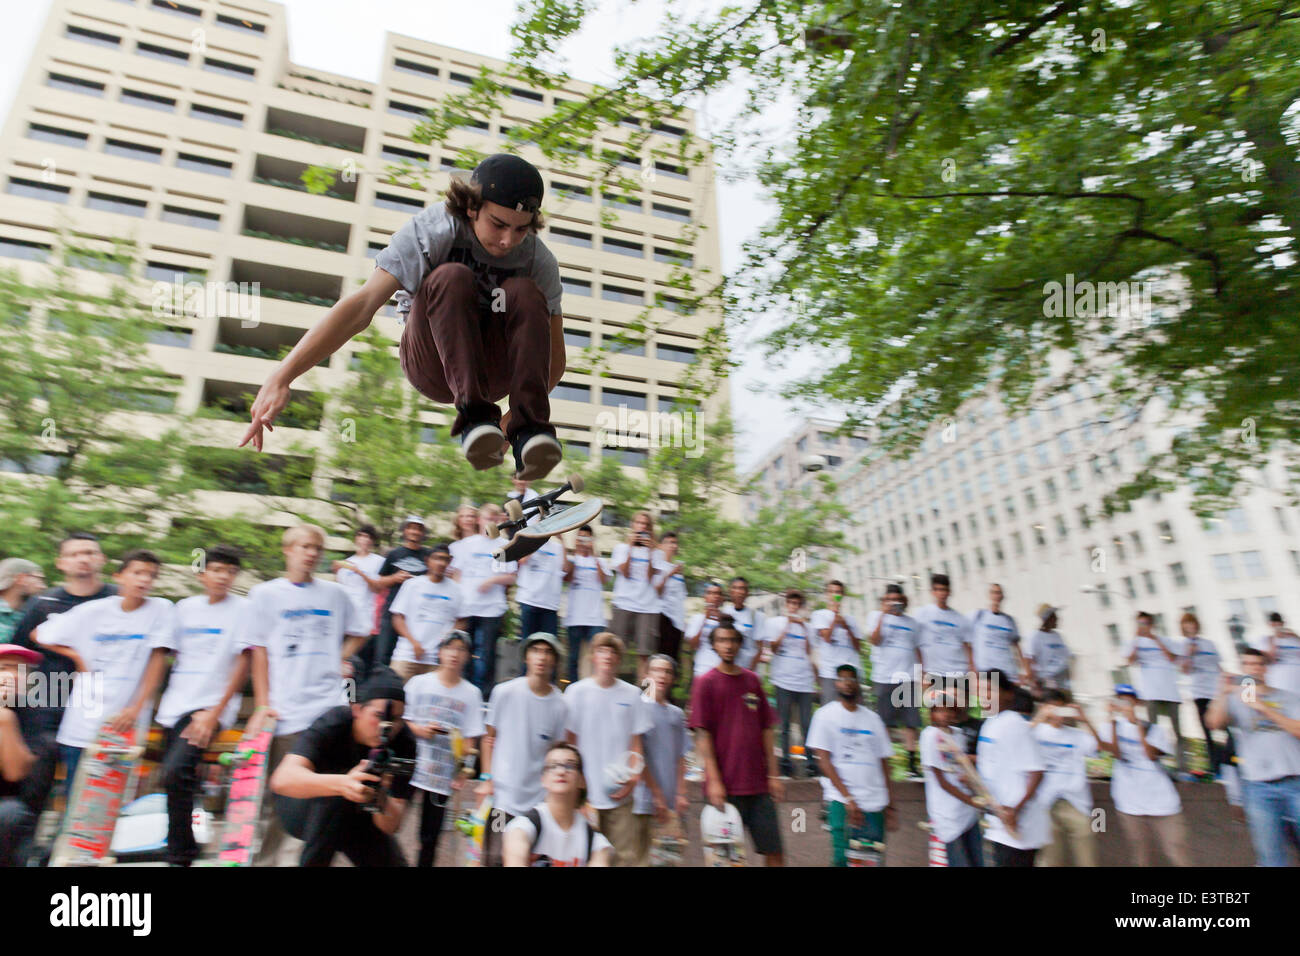 Street skateboarder performing a jump - USA Stock Photo